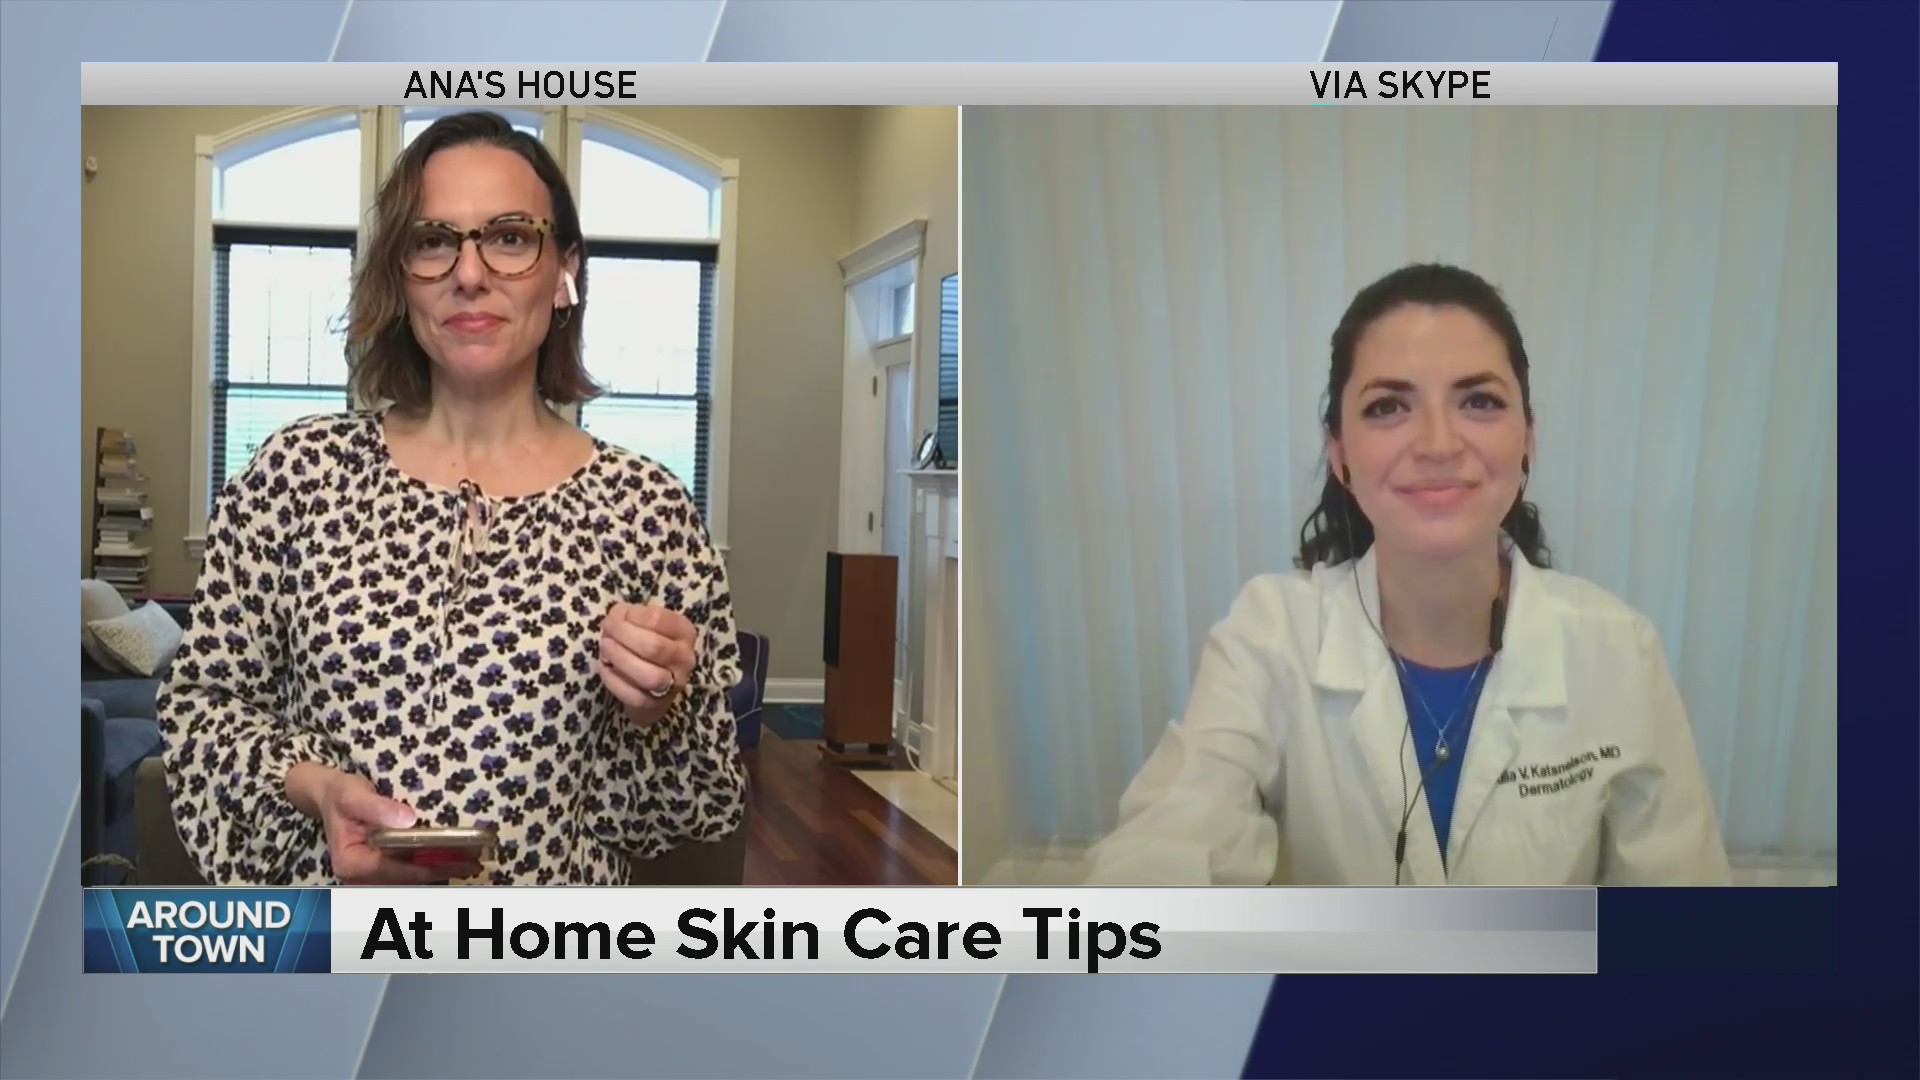 Around ‘The House’ talks skin care and makeup